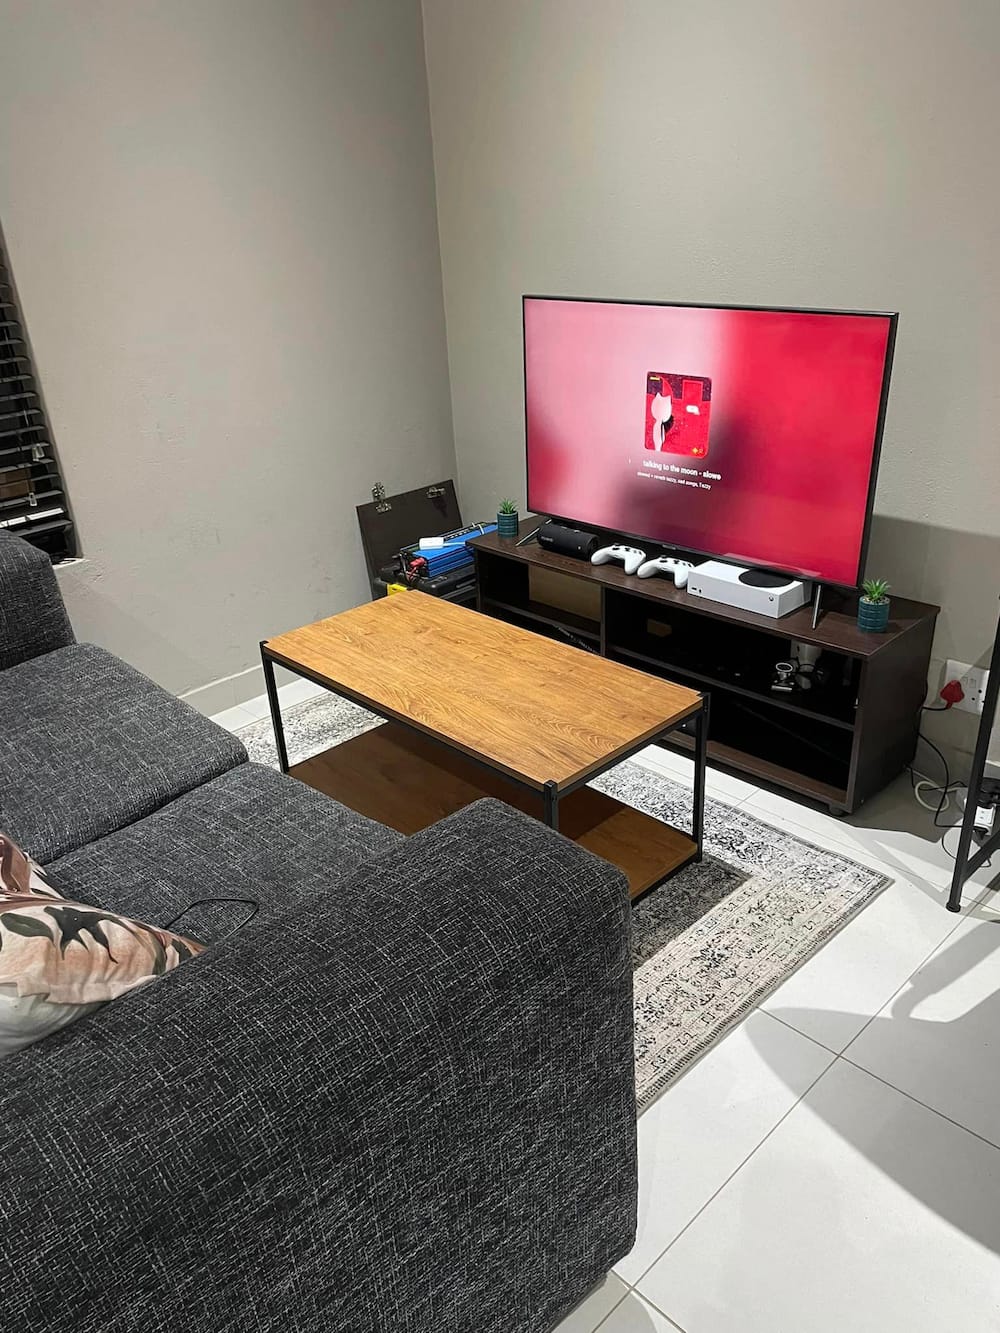 South African Shares Interior Design of Work Space and Bedroom on Facebook Group, Netizens Share Feedback